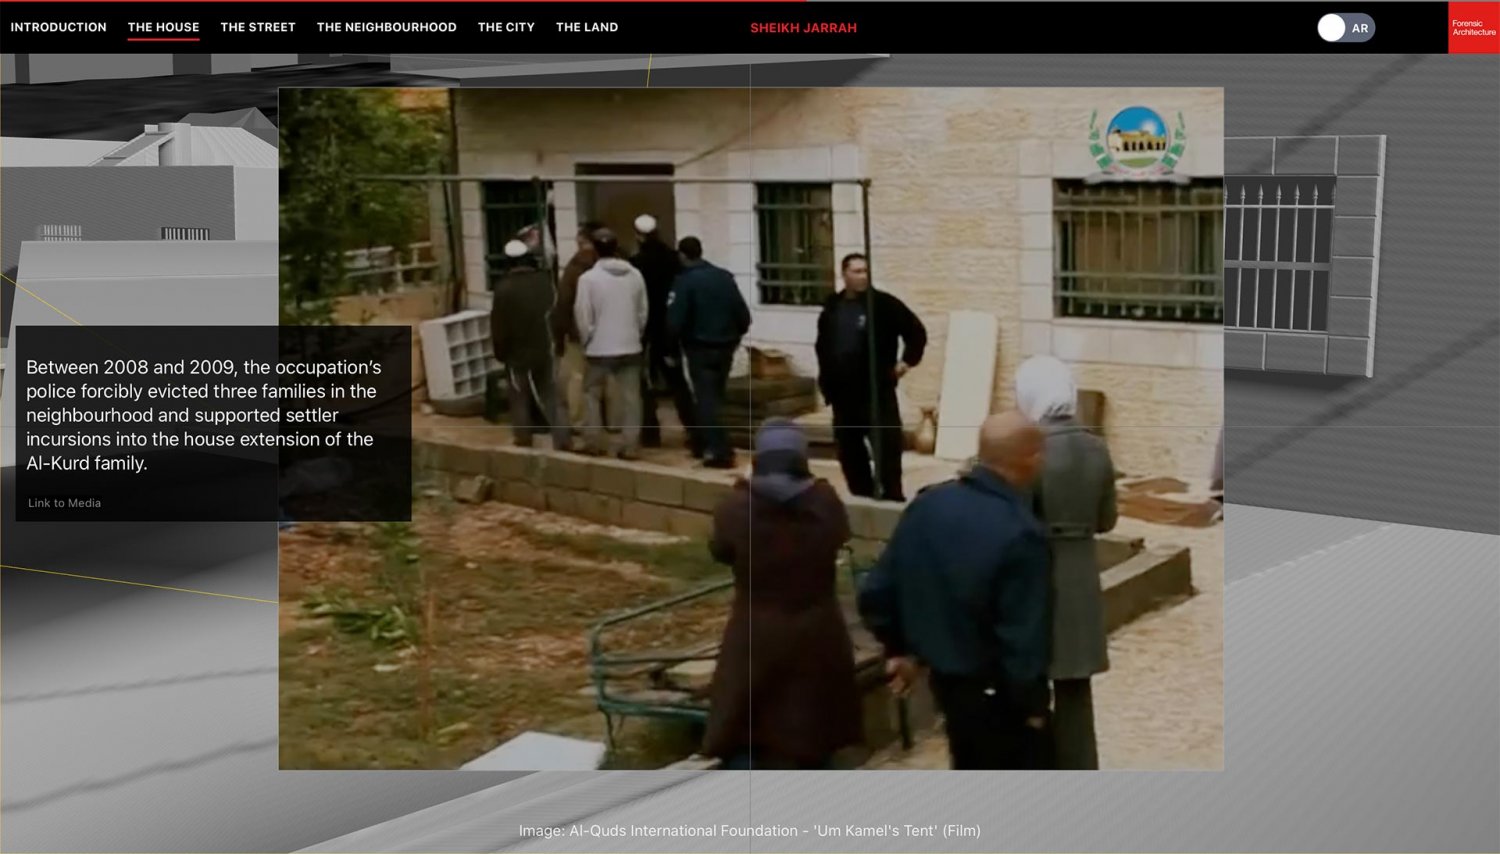 Screenshot from the Forensic Architecture interactive platform